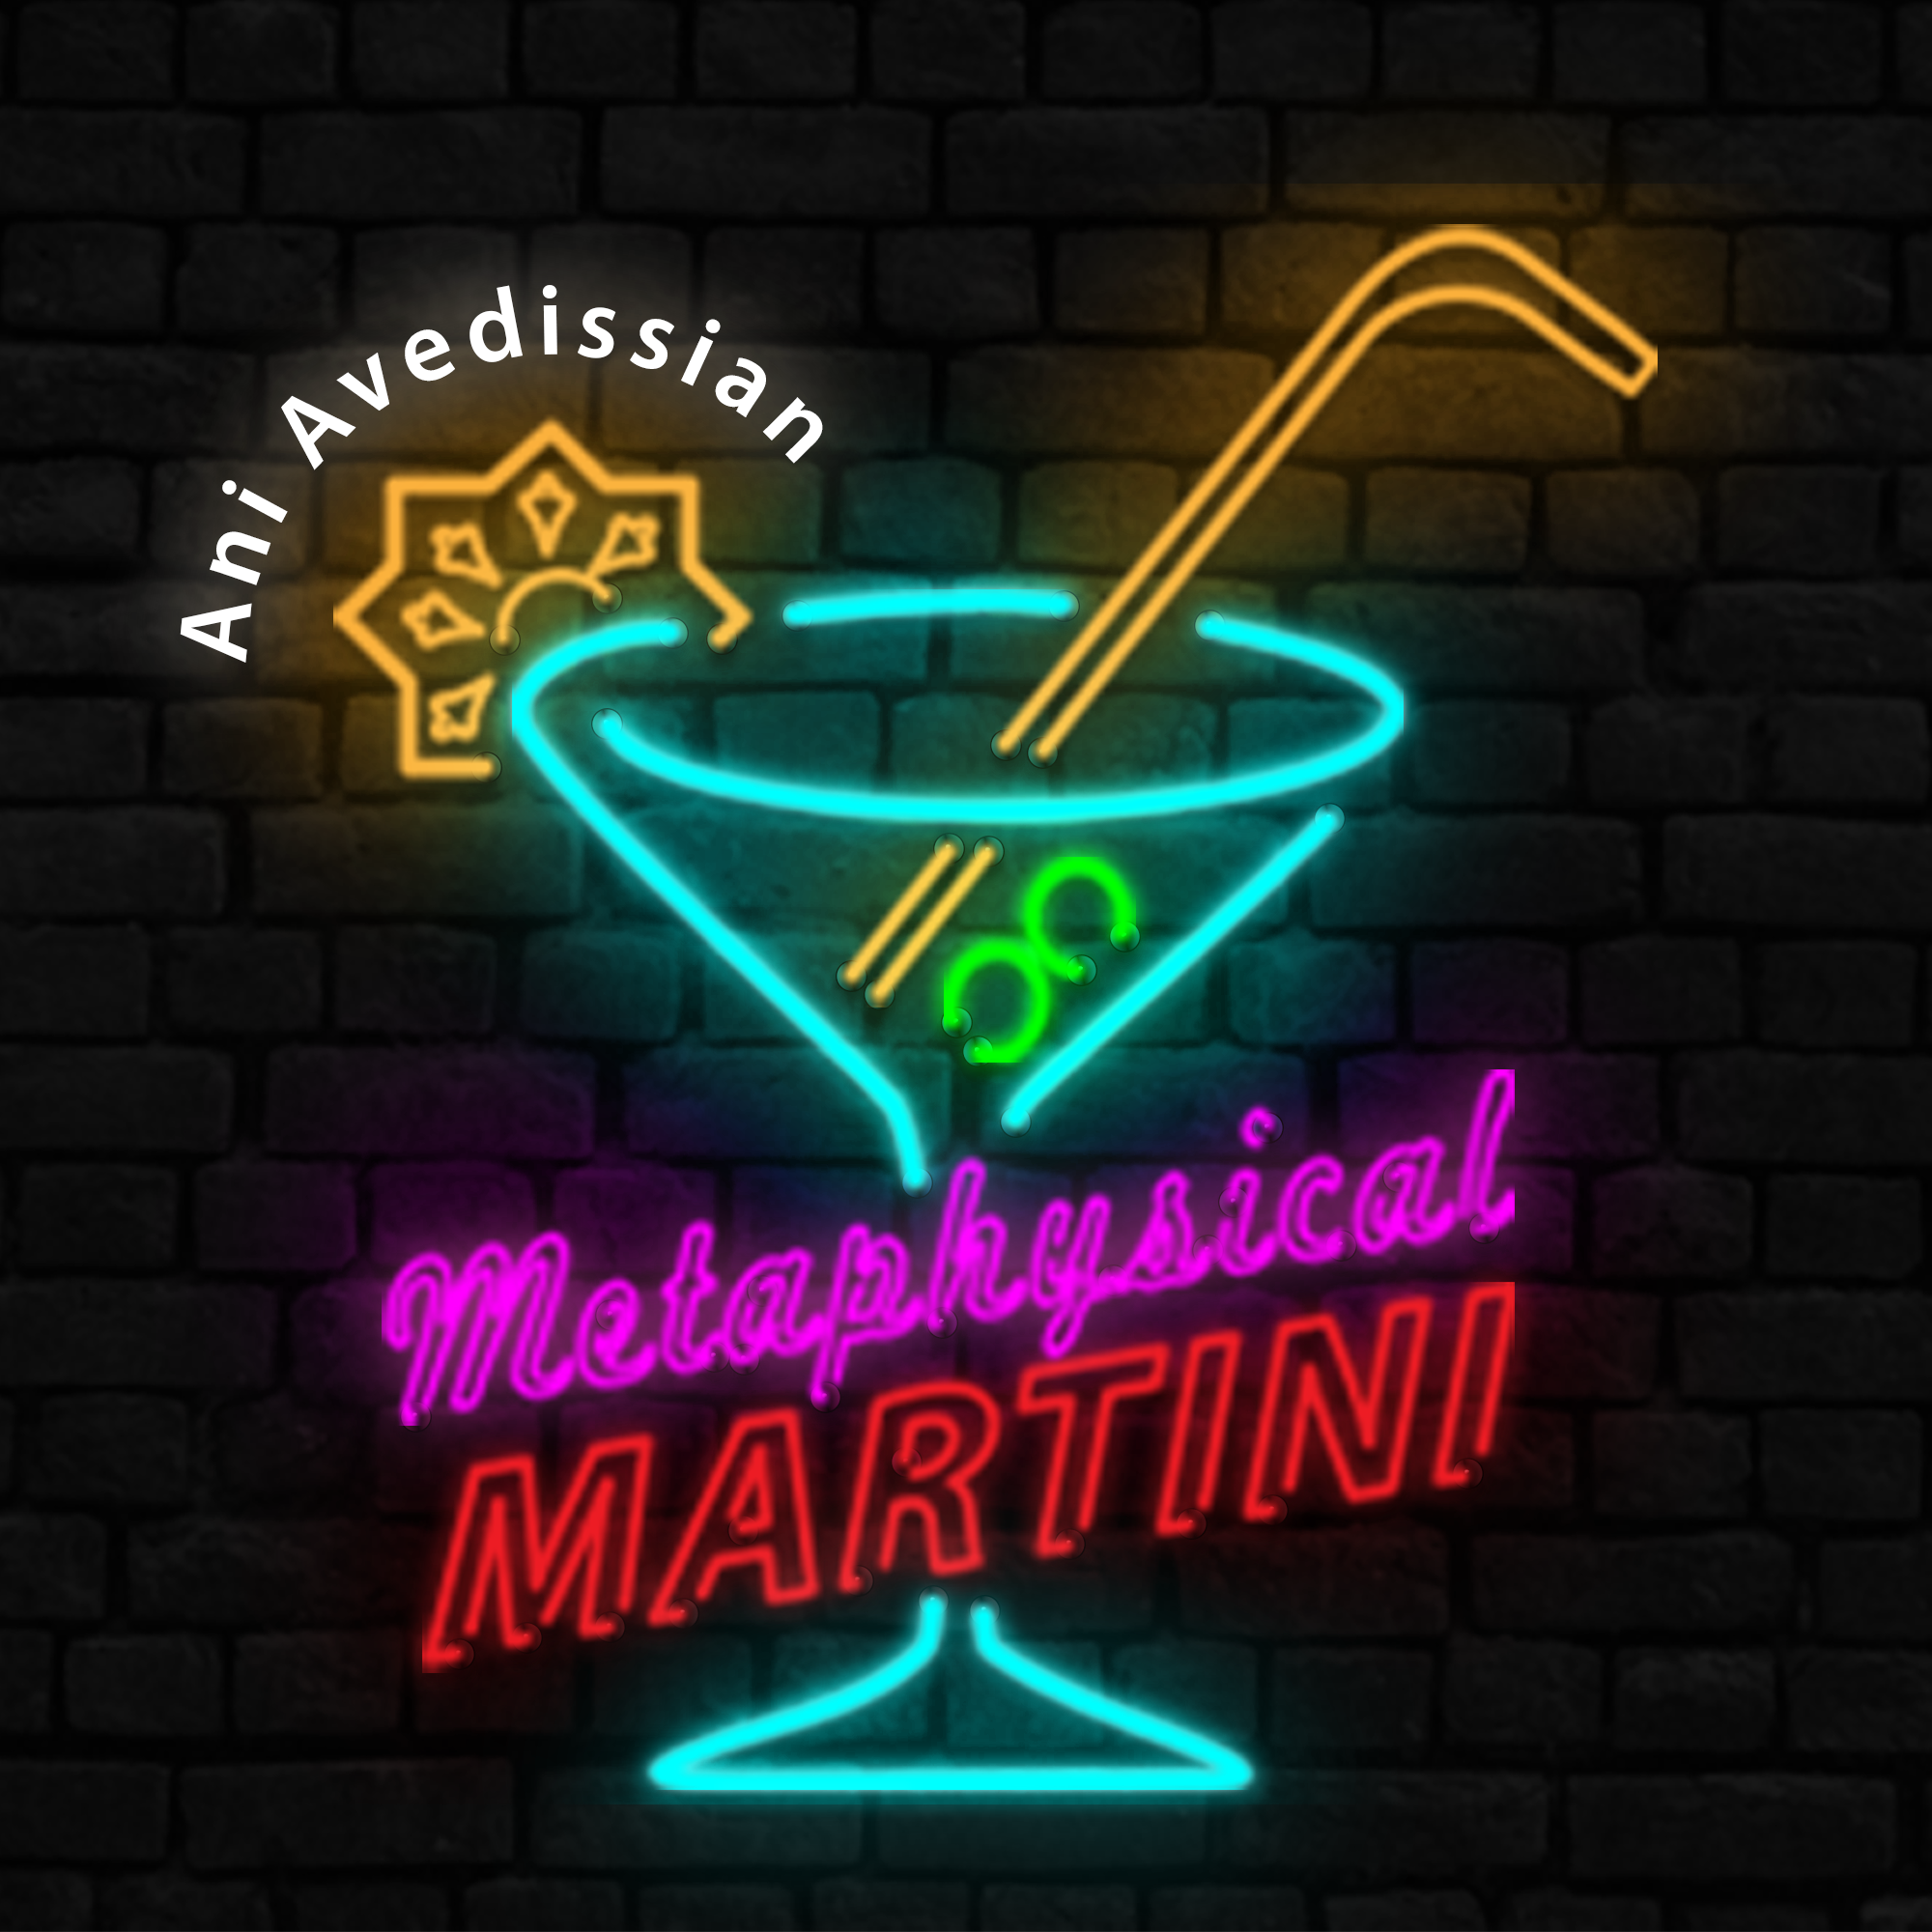 "Metaphysical Martini"   01/18/2023  - RESPECT the Constitution!  STOP political prostitution!